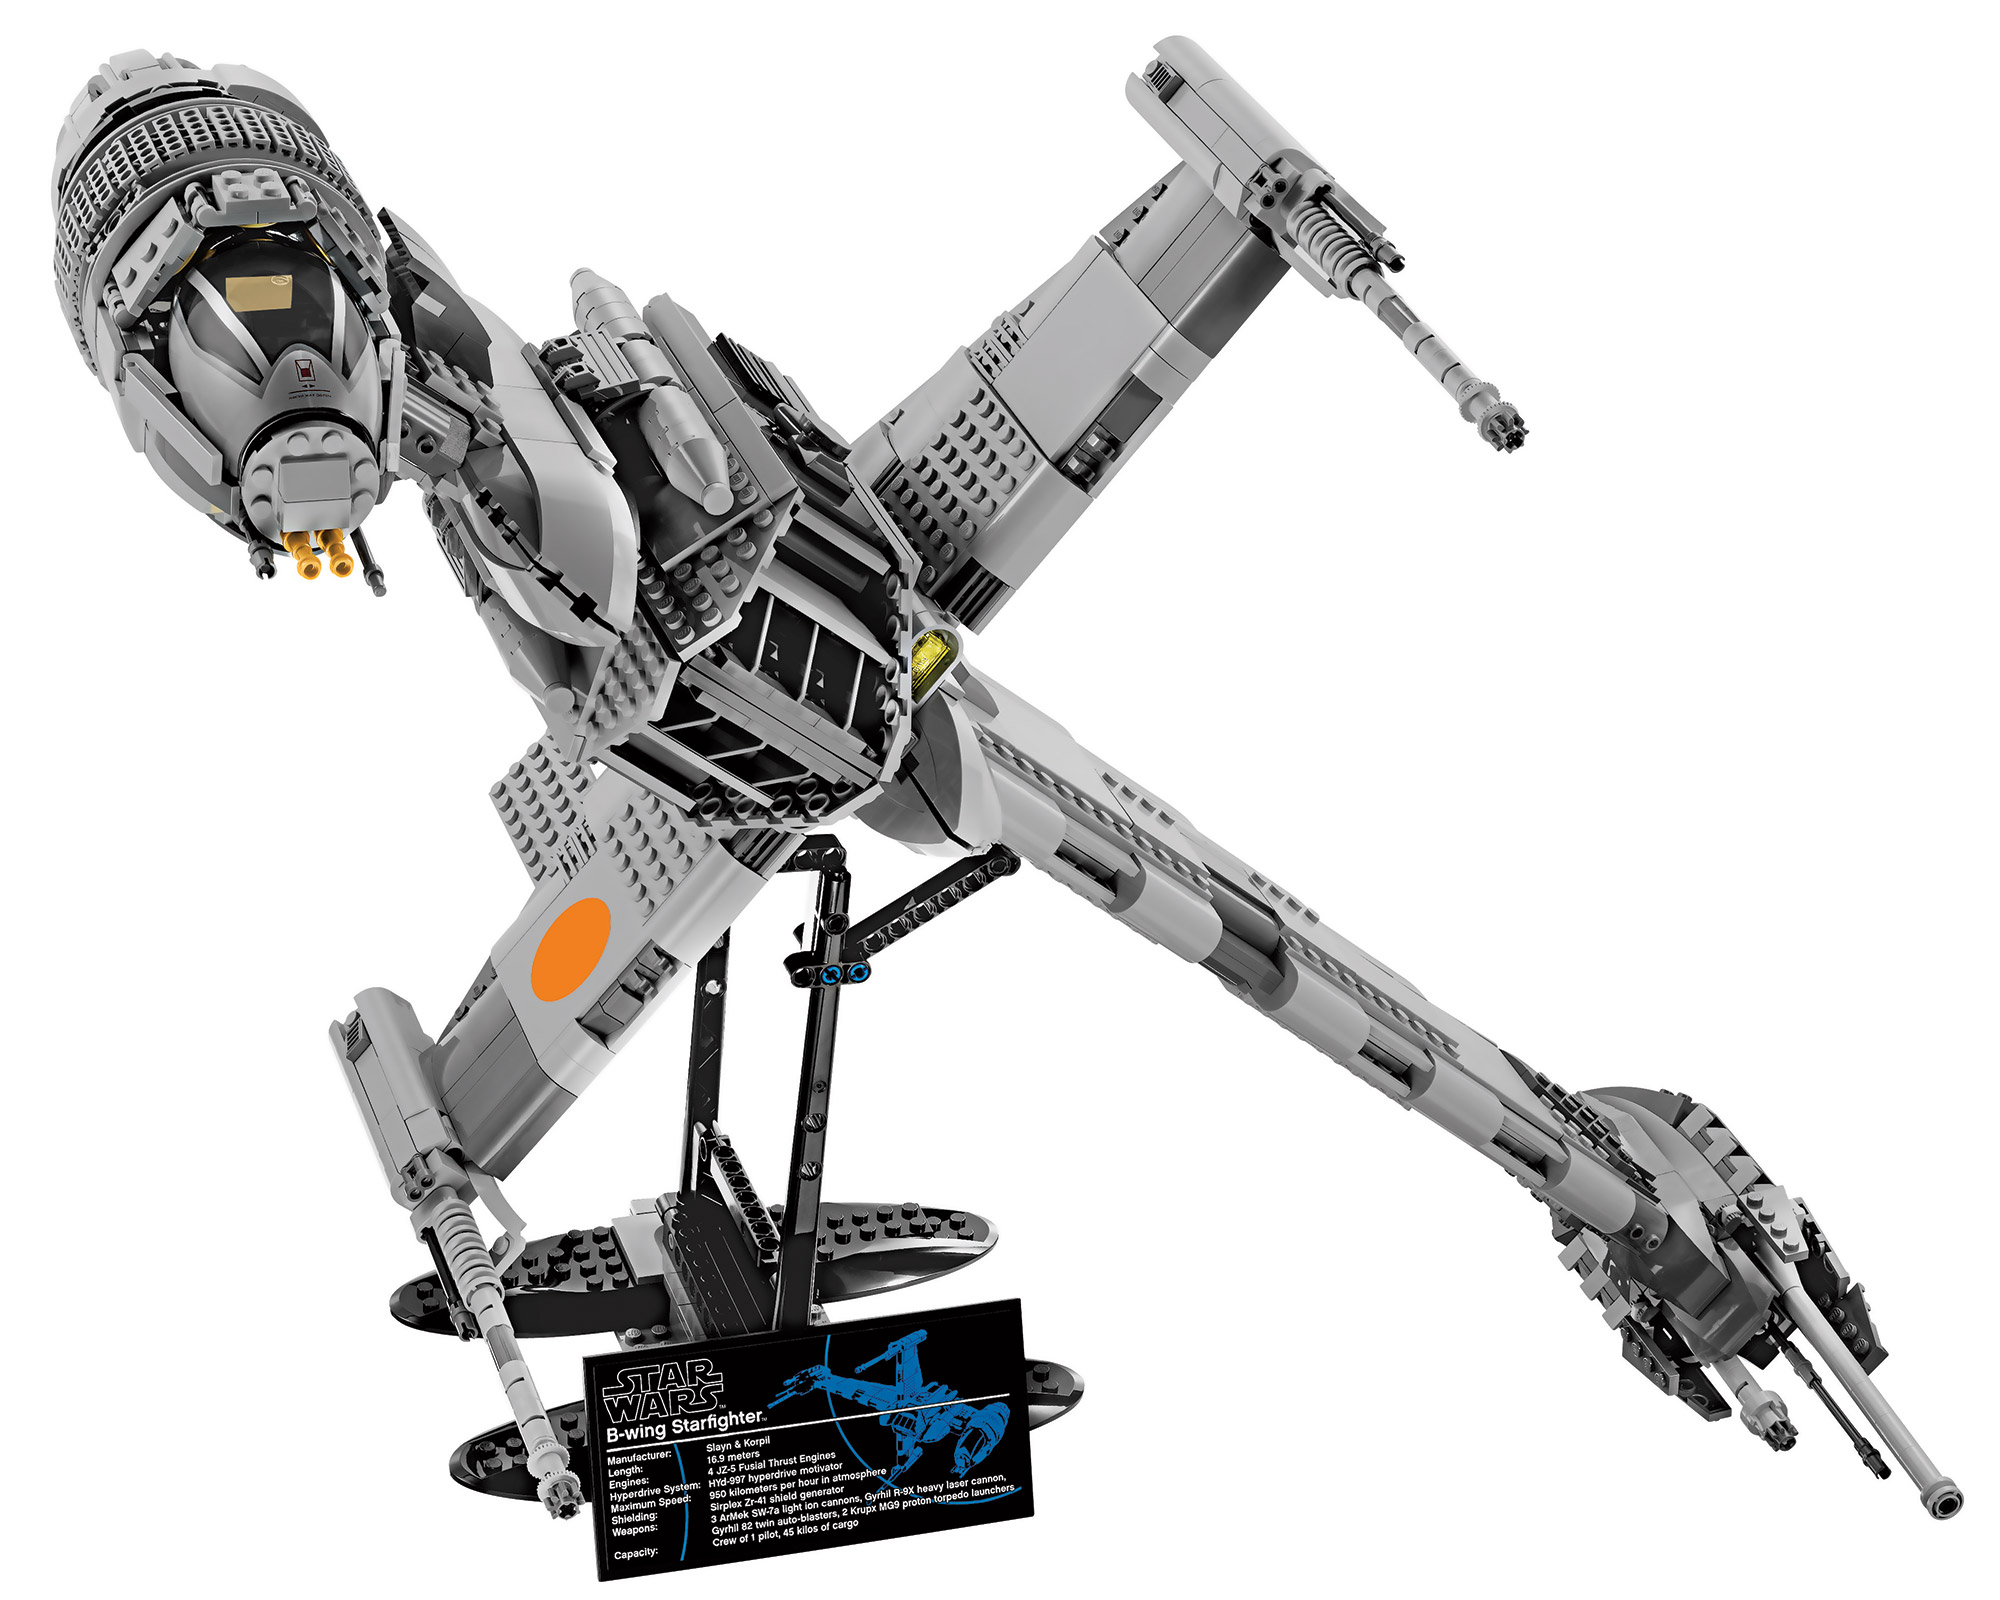 ... about LEGO EXCLUSIVE B WING STARFIGHTER STAR WARS SPACE SHIP